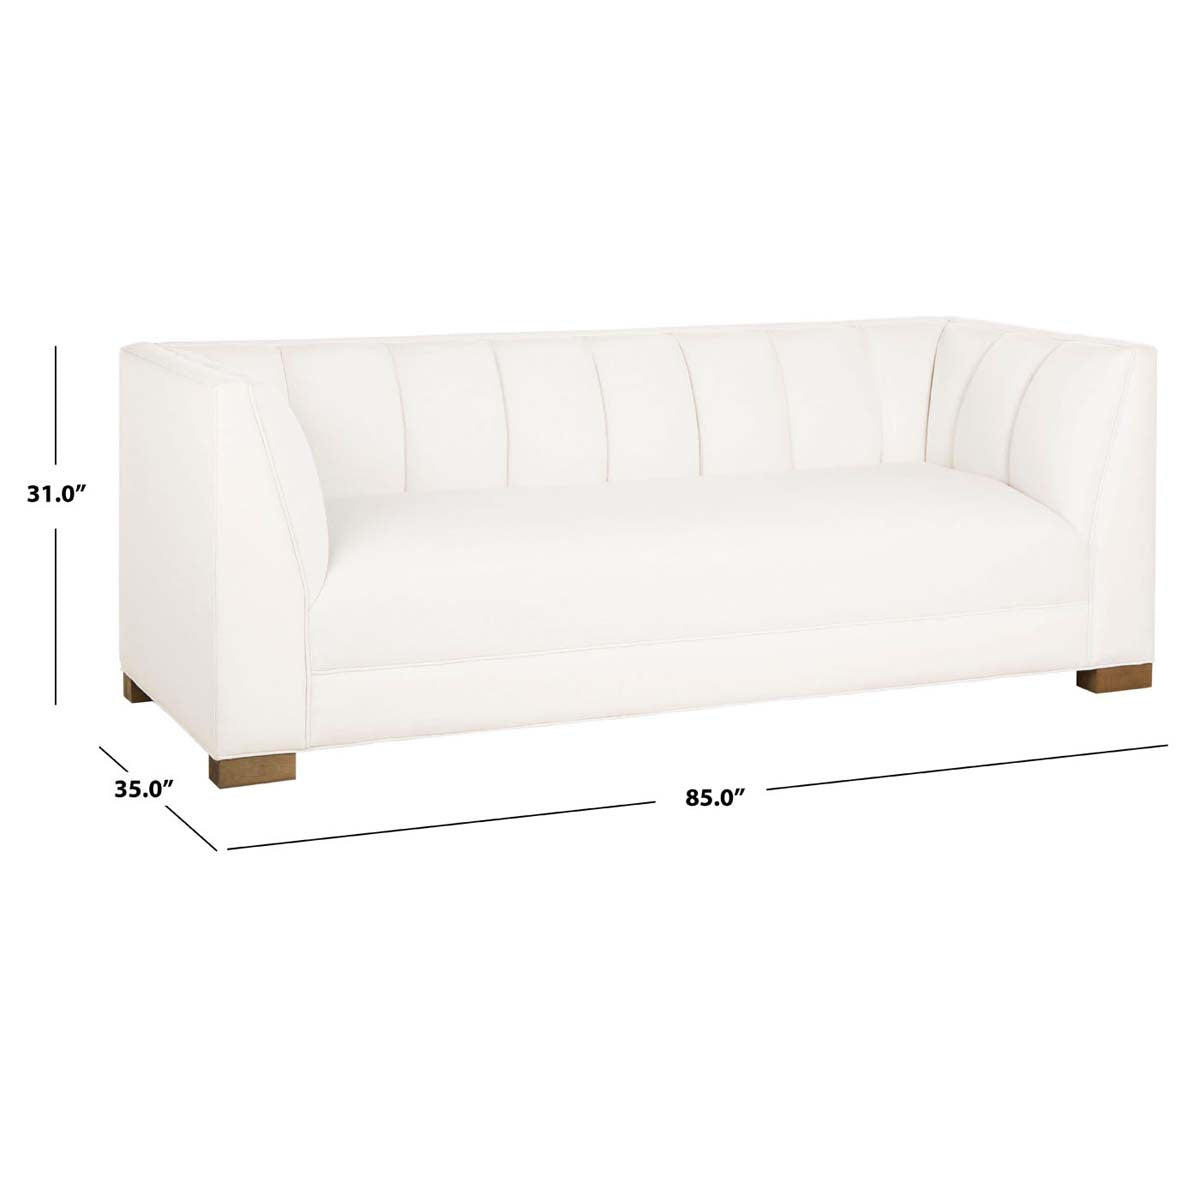 Safavieh Couture Beverly  Linen Blend Sofa - White